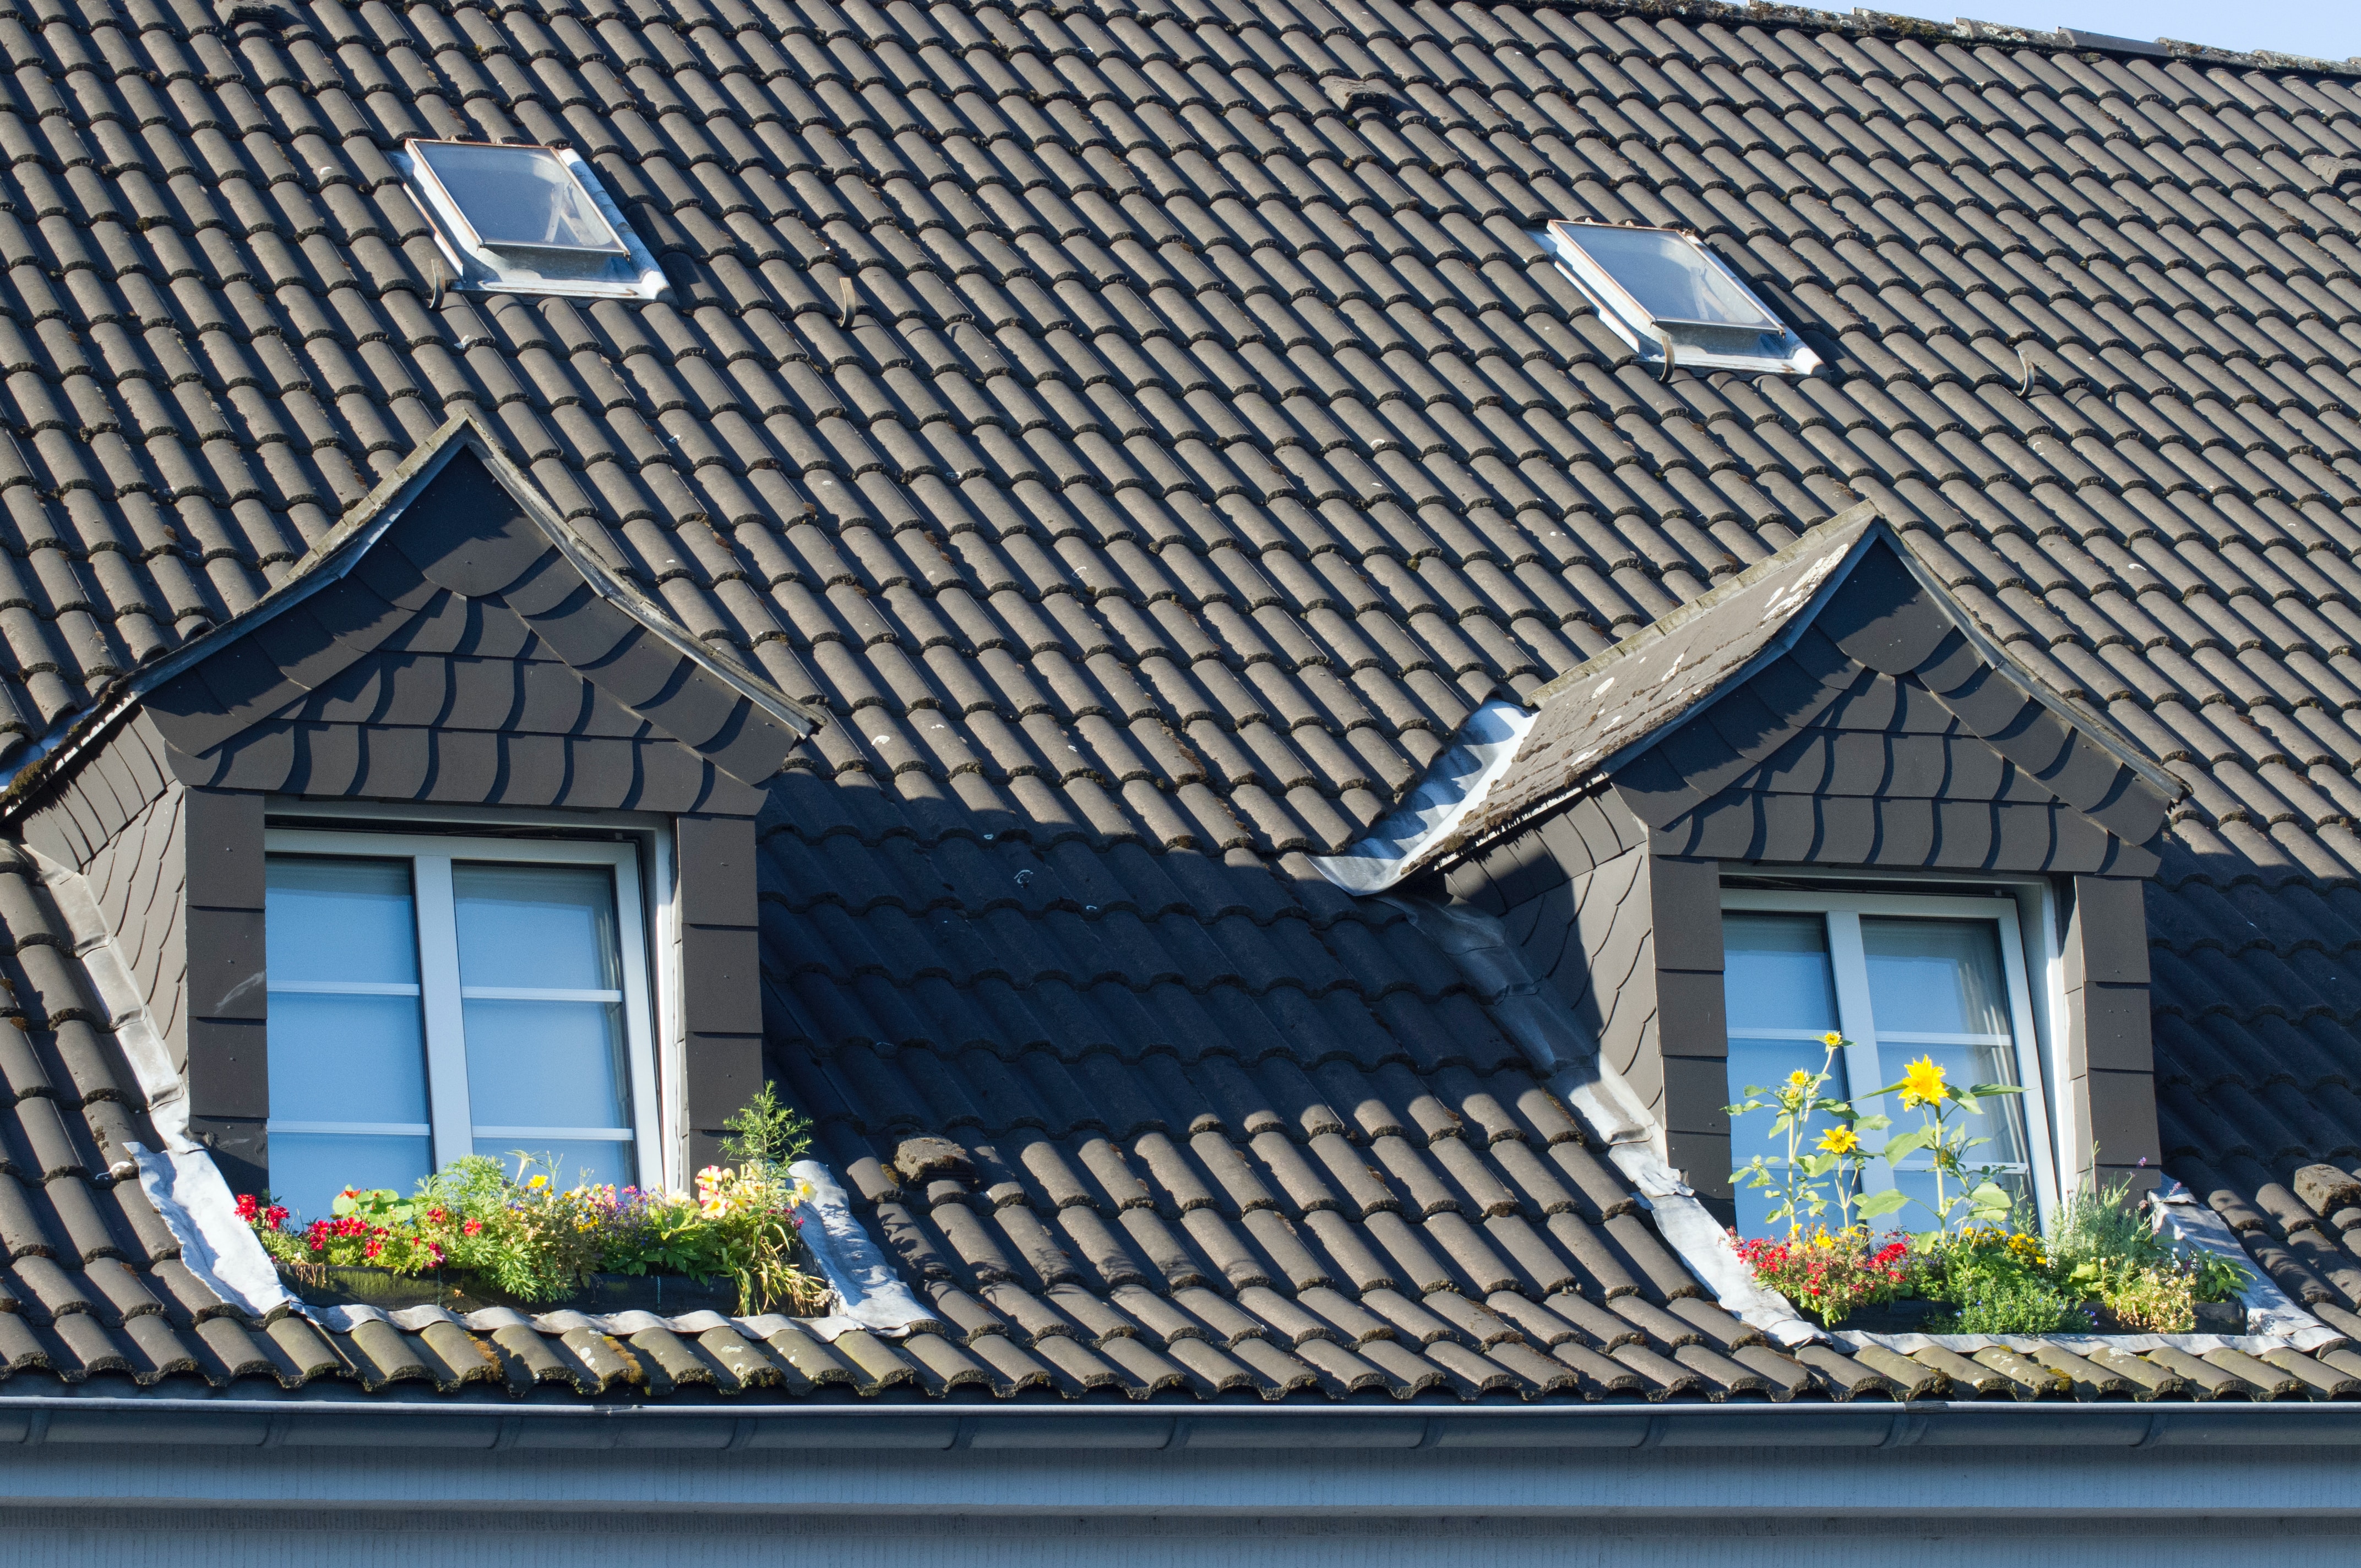 III. Advantages of Energy-Efficient Roofing